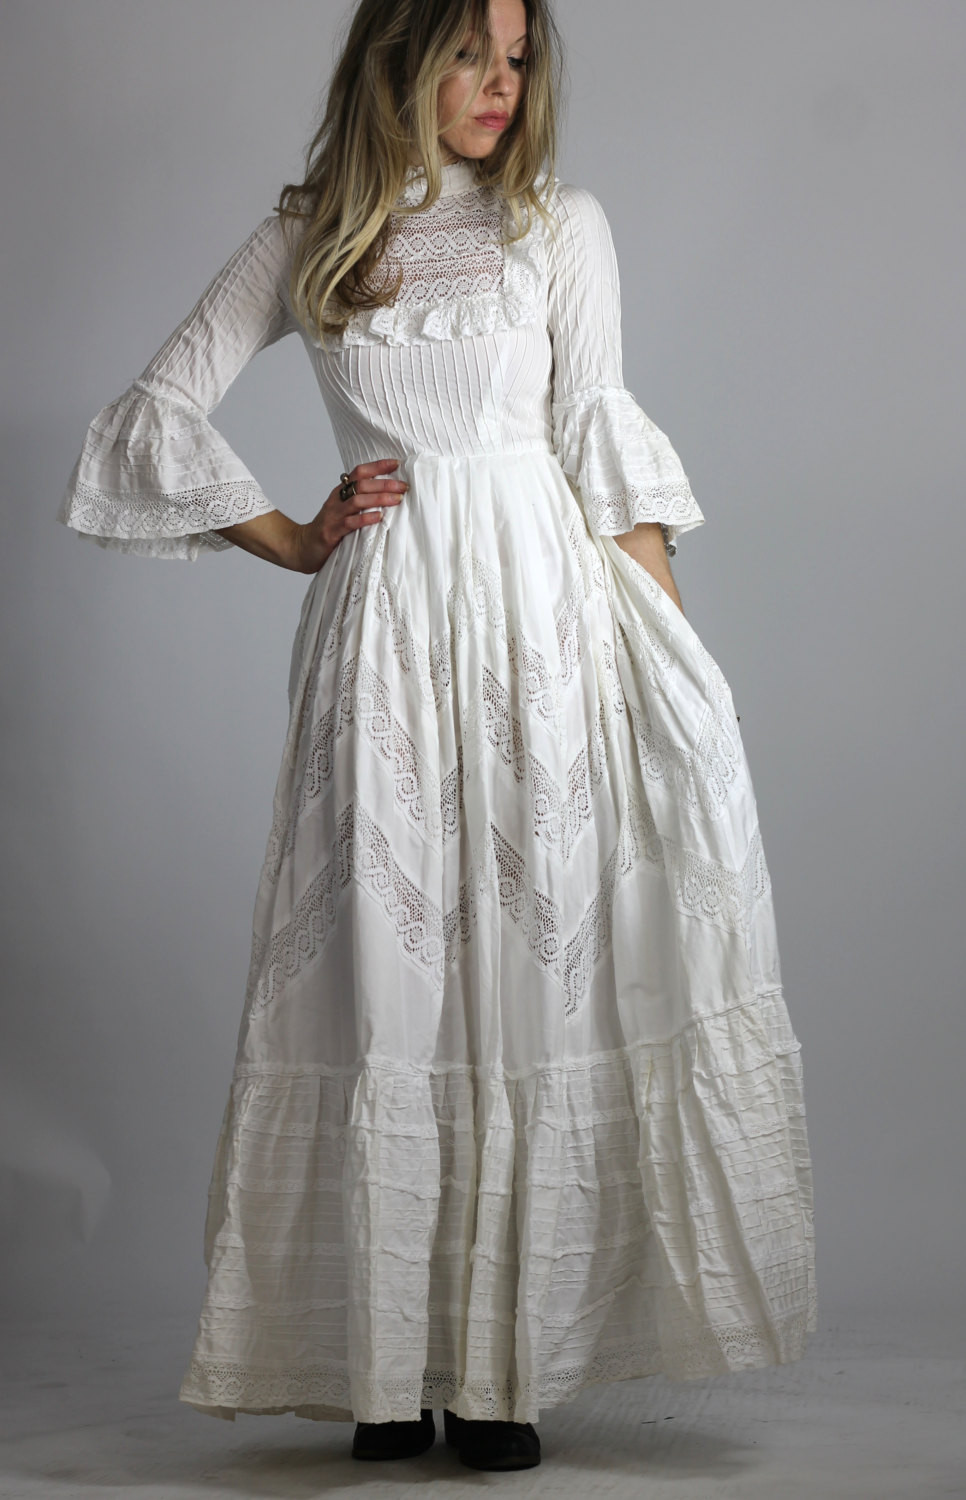 Mexican Wedding Dresses
 Vintage 60s Mexican Wedding Dress White Victorian Style Maxi